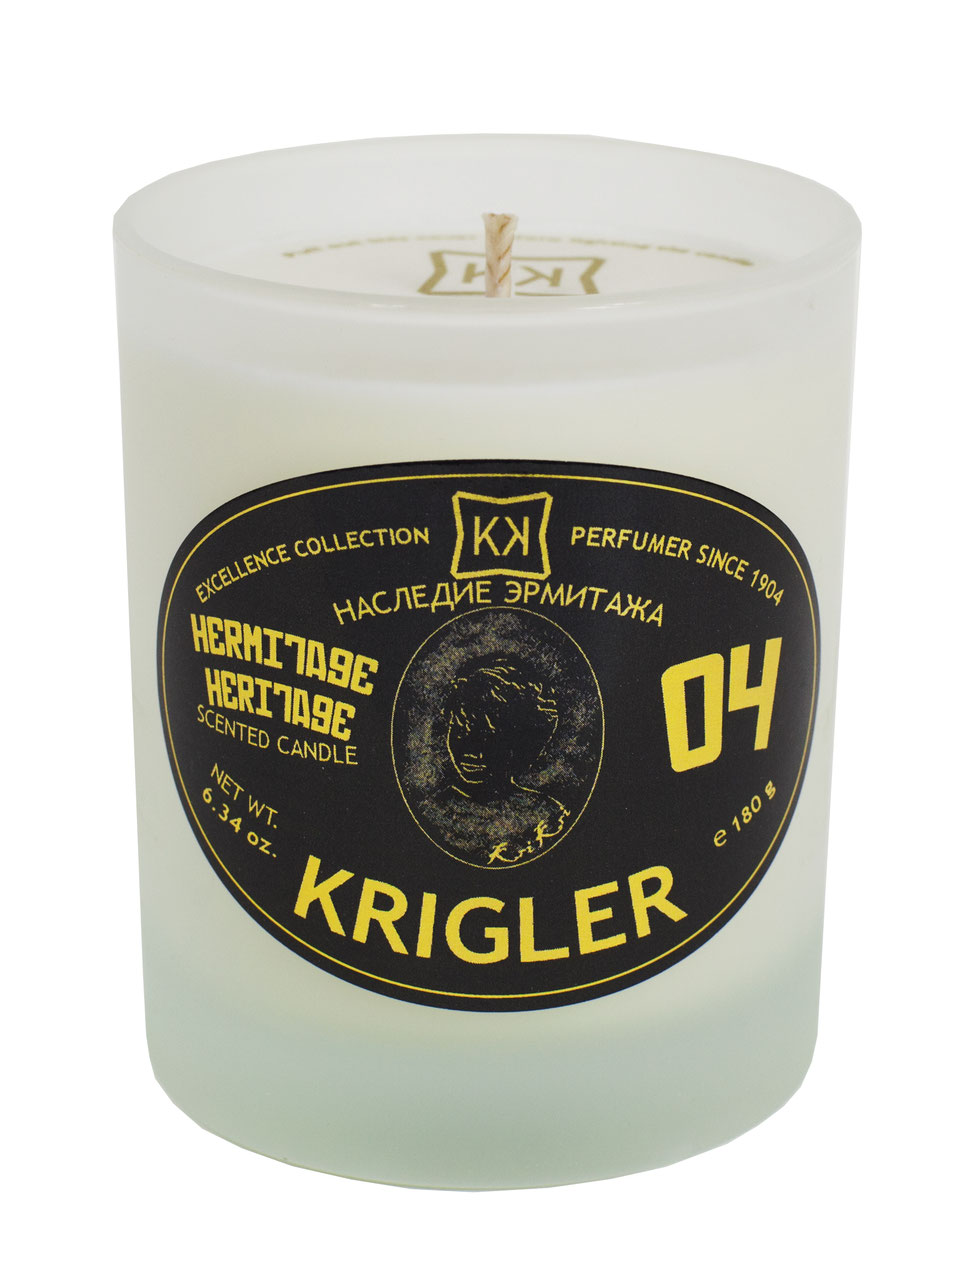 HERMITAGE HERITAGE 04 Scented candle